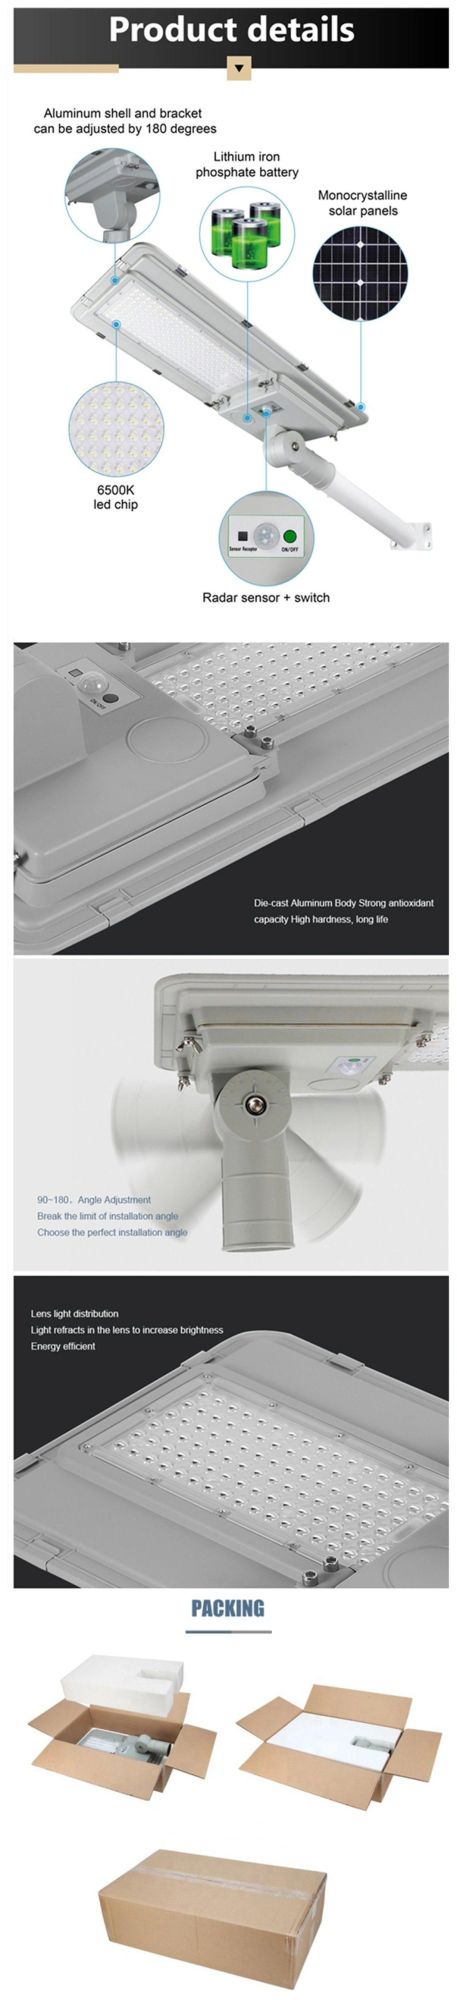 All in One Integrated Solar LED Street Light with Lithium Battery Motion Sensor Based on Cardboard